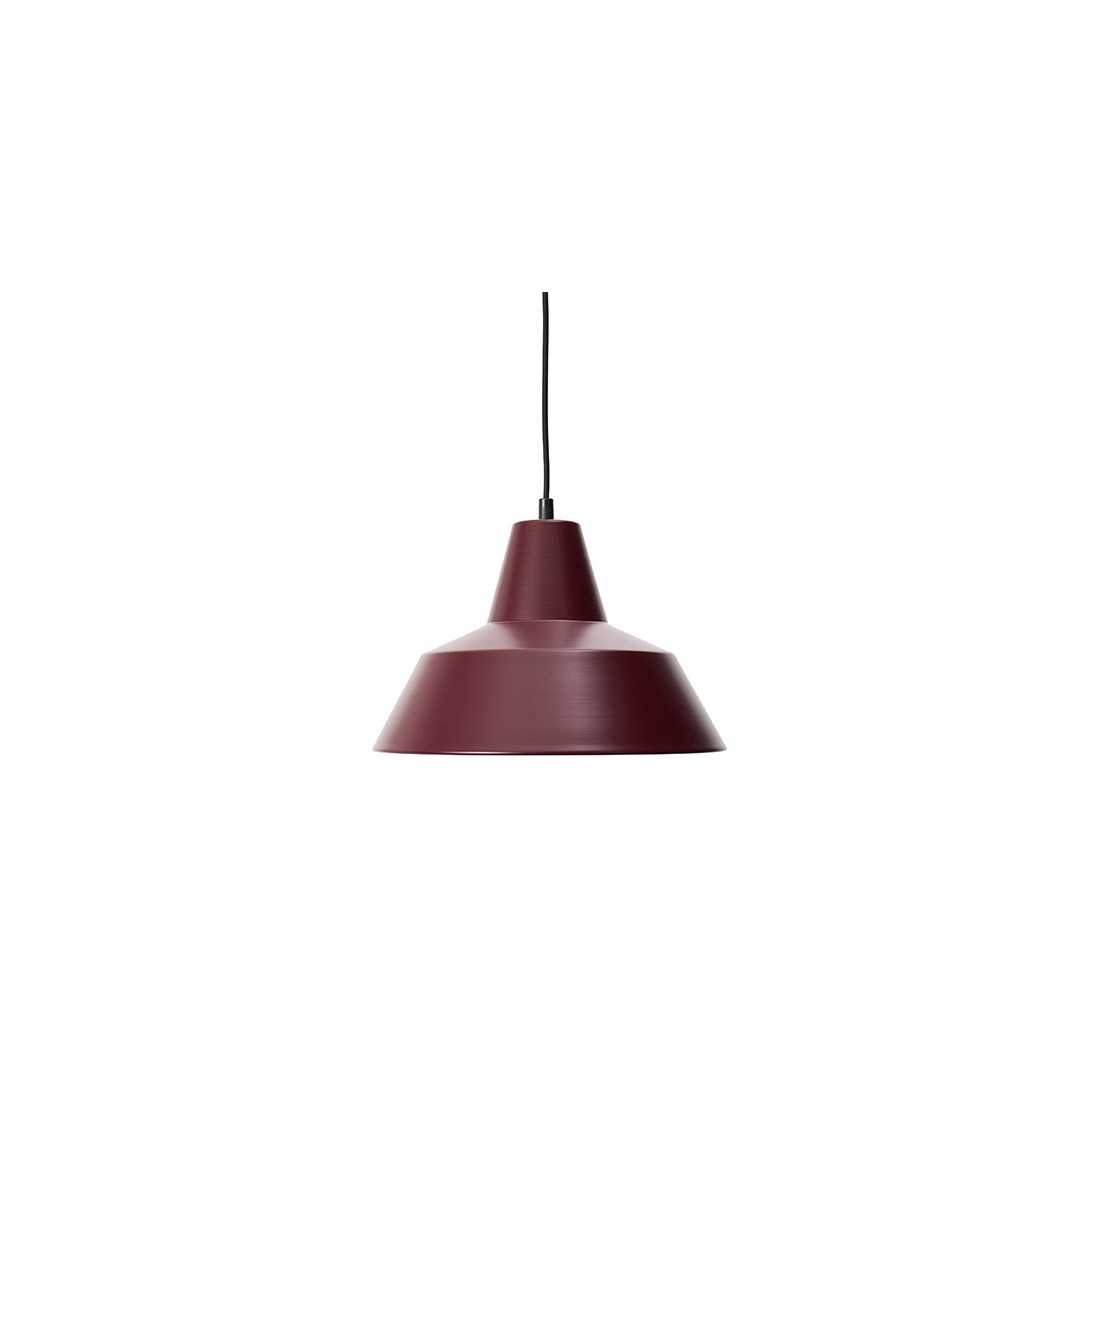 Made By Hand – Workshop Pendel W2 Wine Red